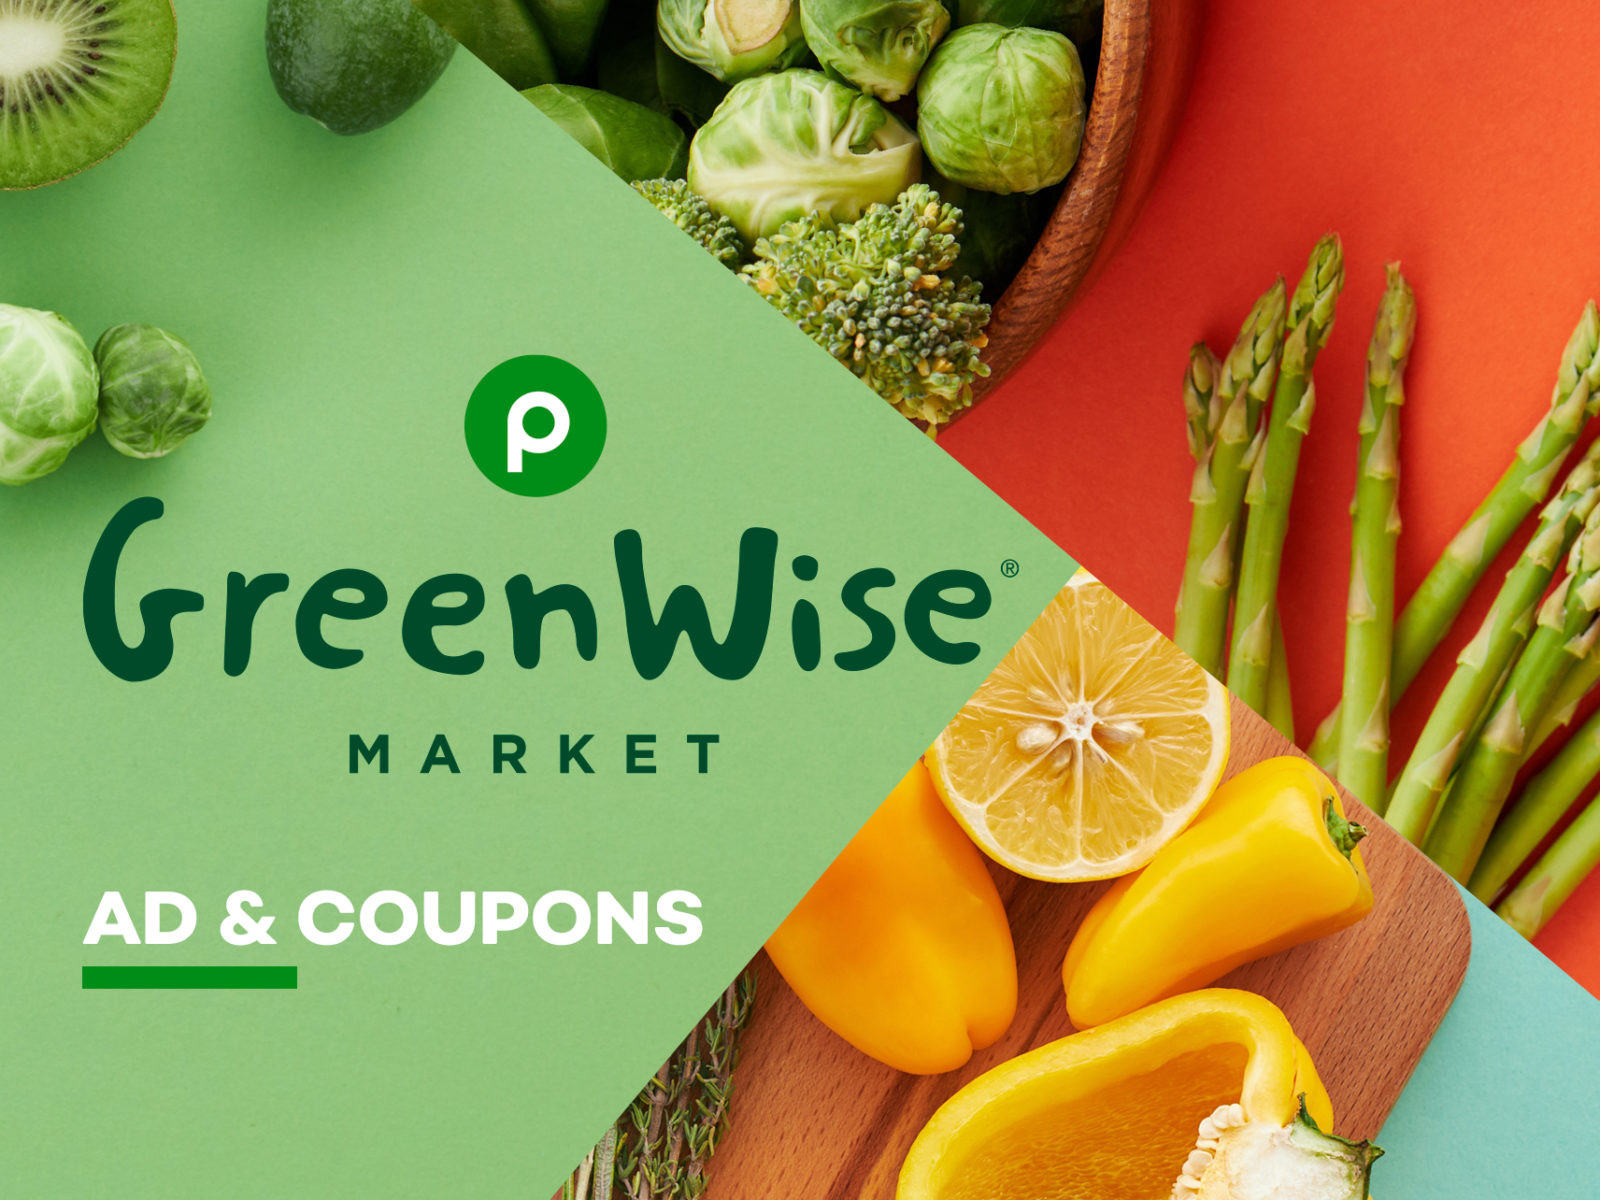 Publix GreenWise Market Ad & Coupons Week Of 10/5 to 10/11 (10/4 to 10/10 For Some)